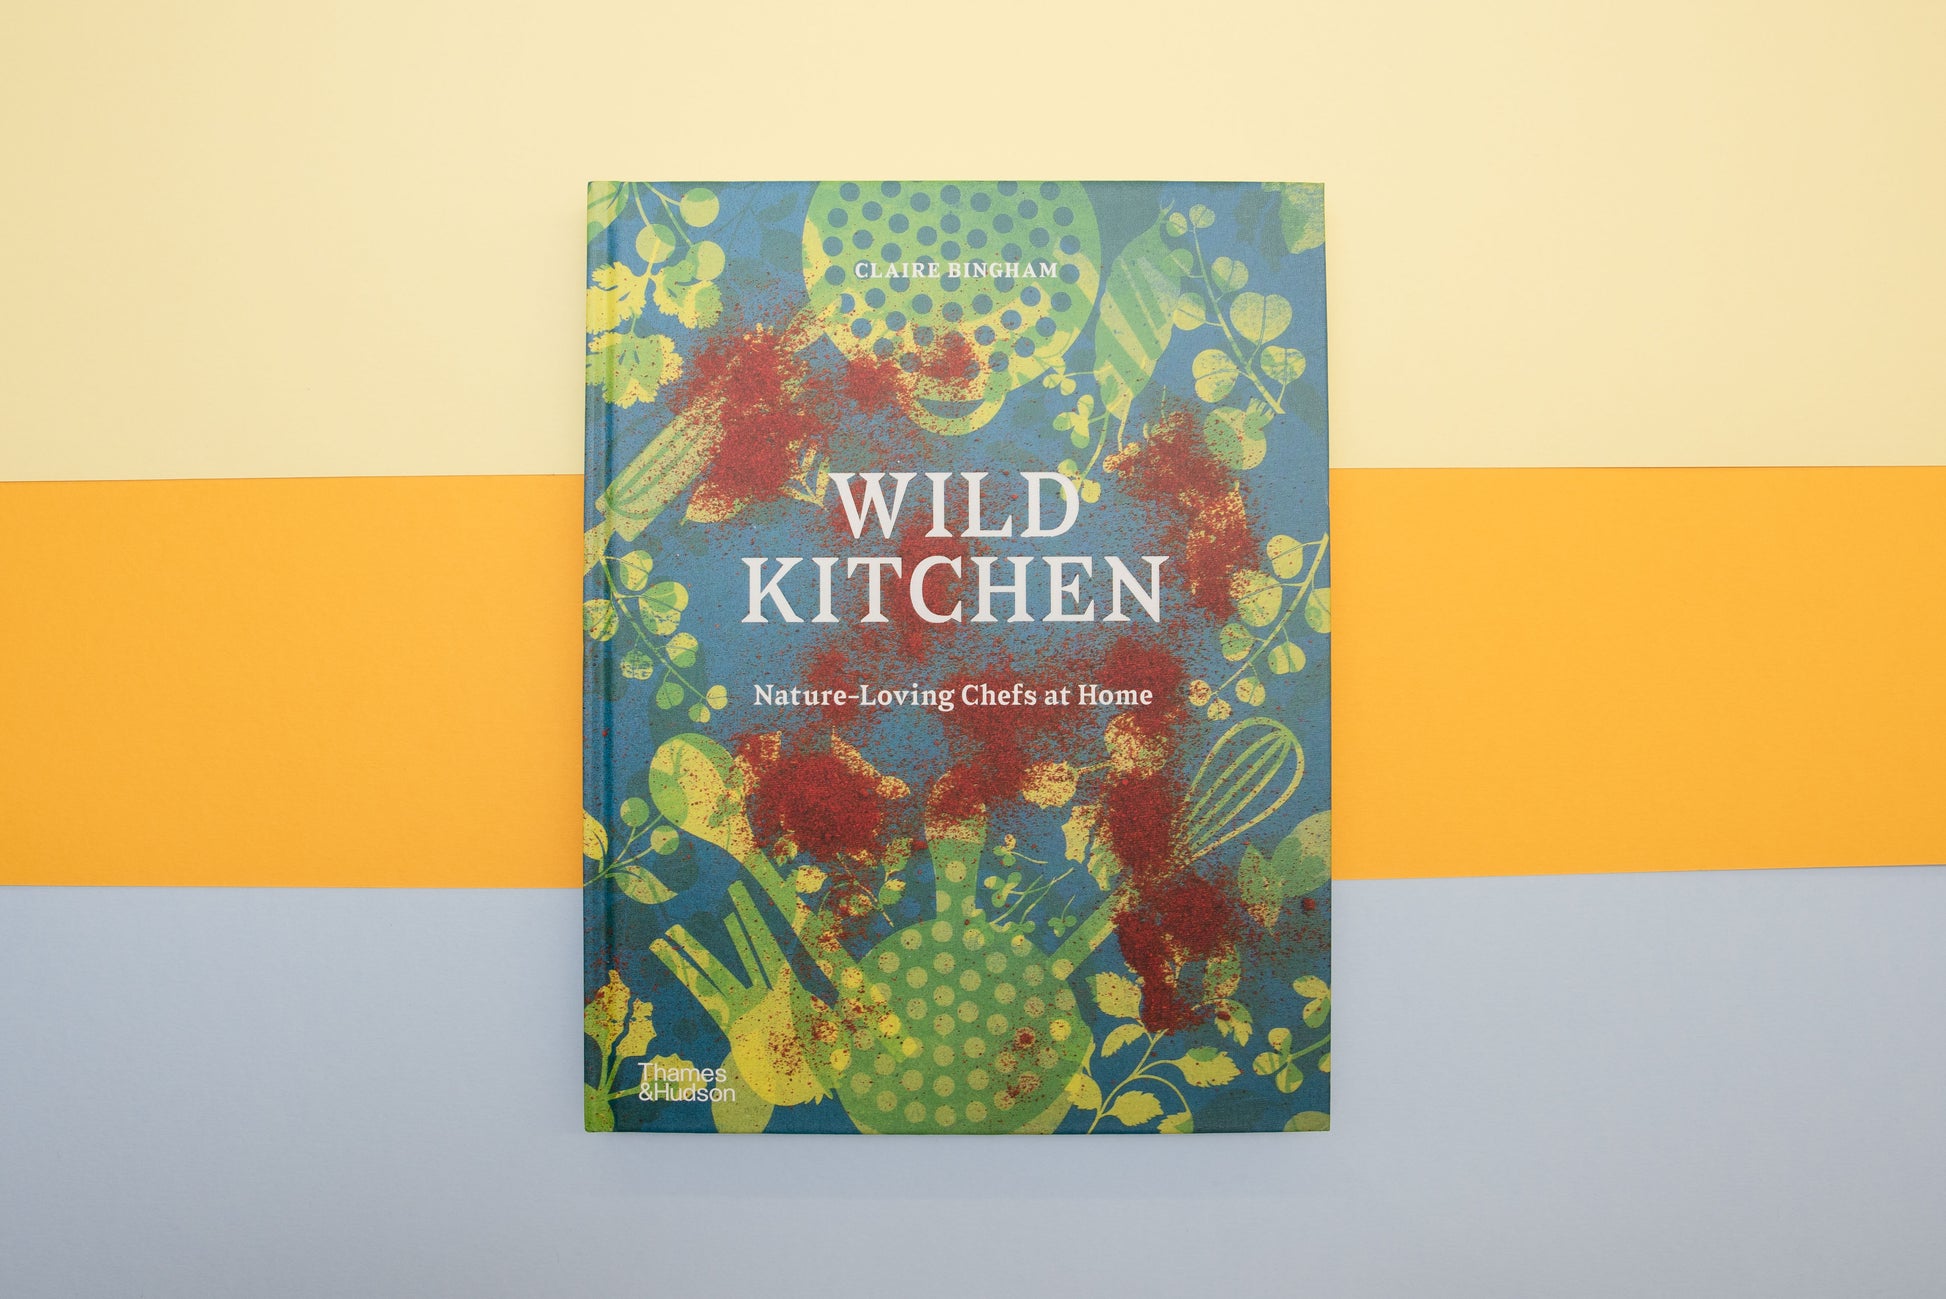 Wild Kitchen: Nature-Loving Chef's at Home - by Claire Bingham